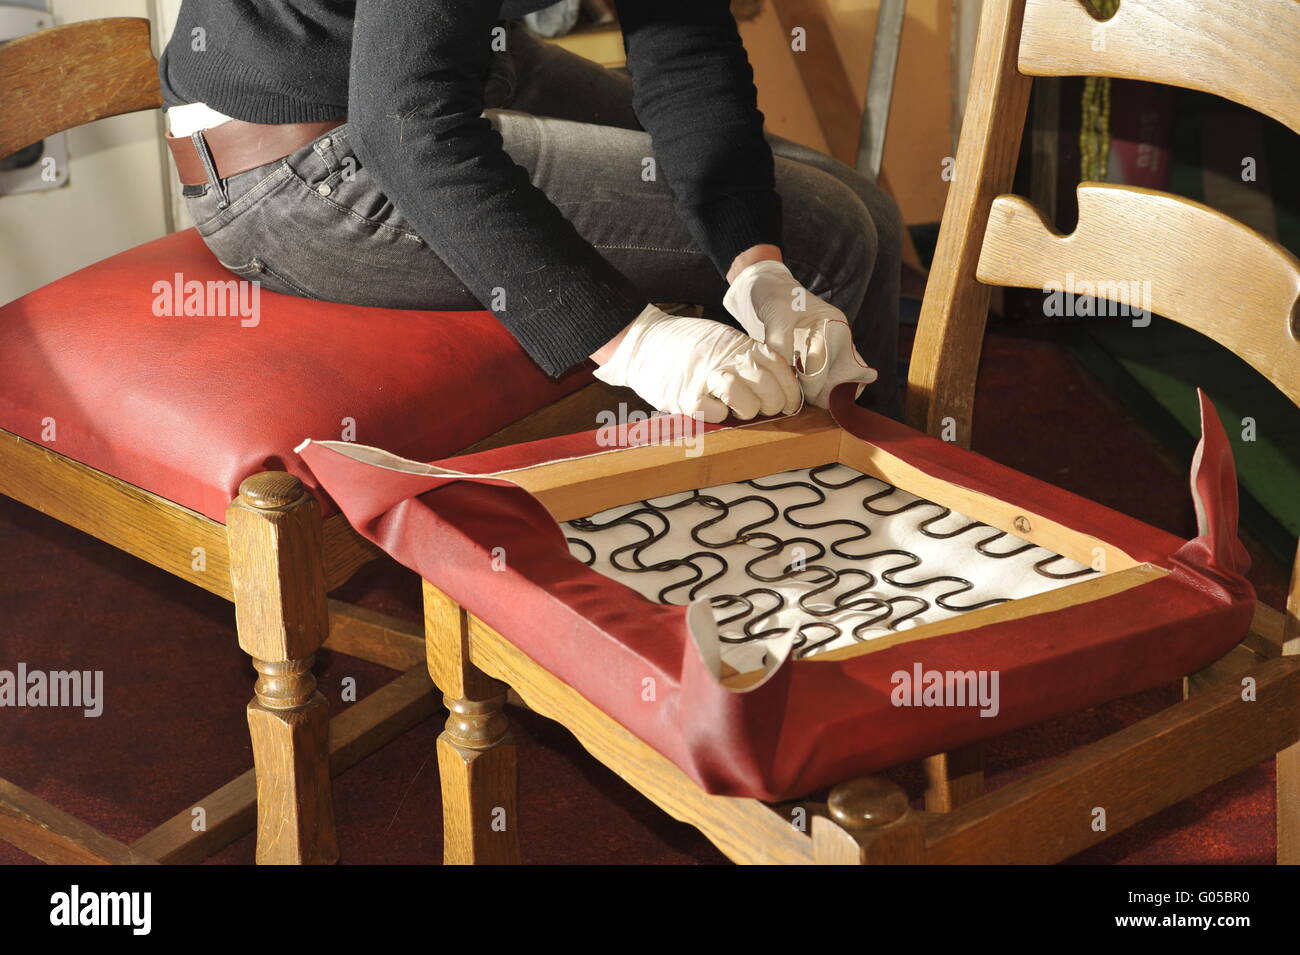 Woman upholstering a kitchen stool. Stock Photo